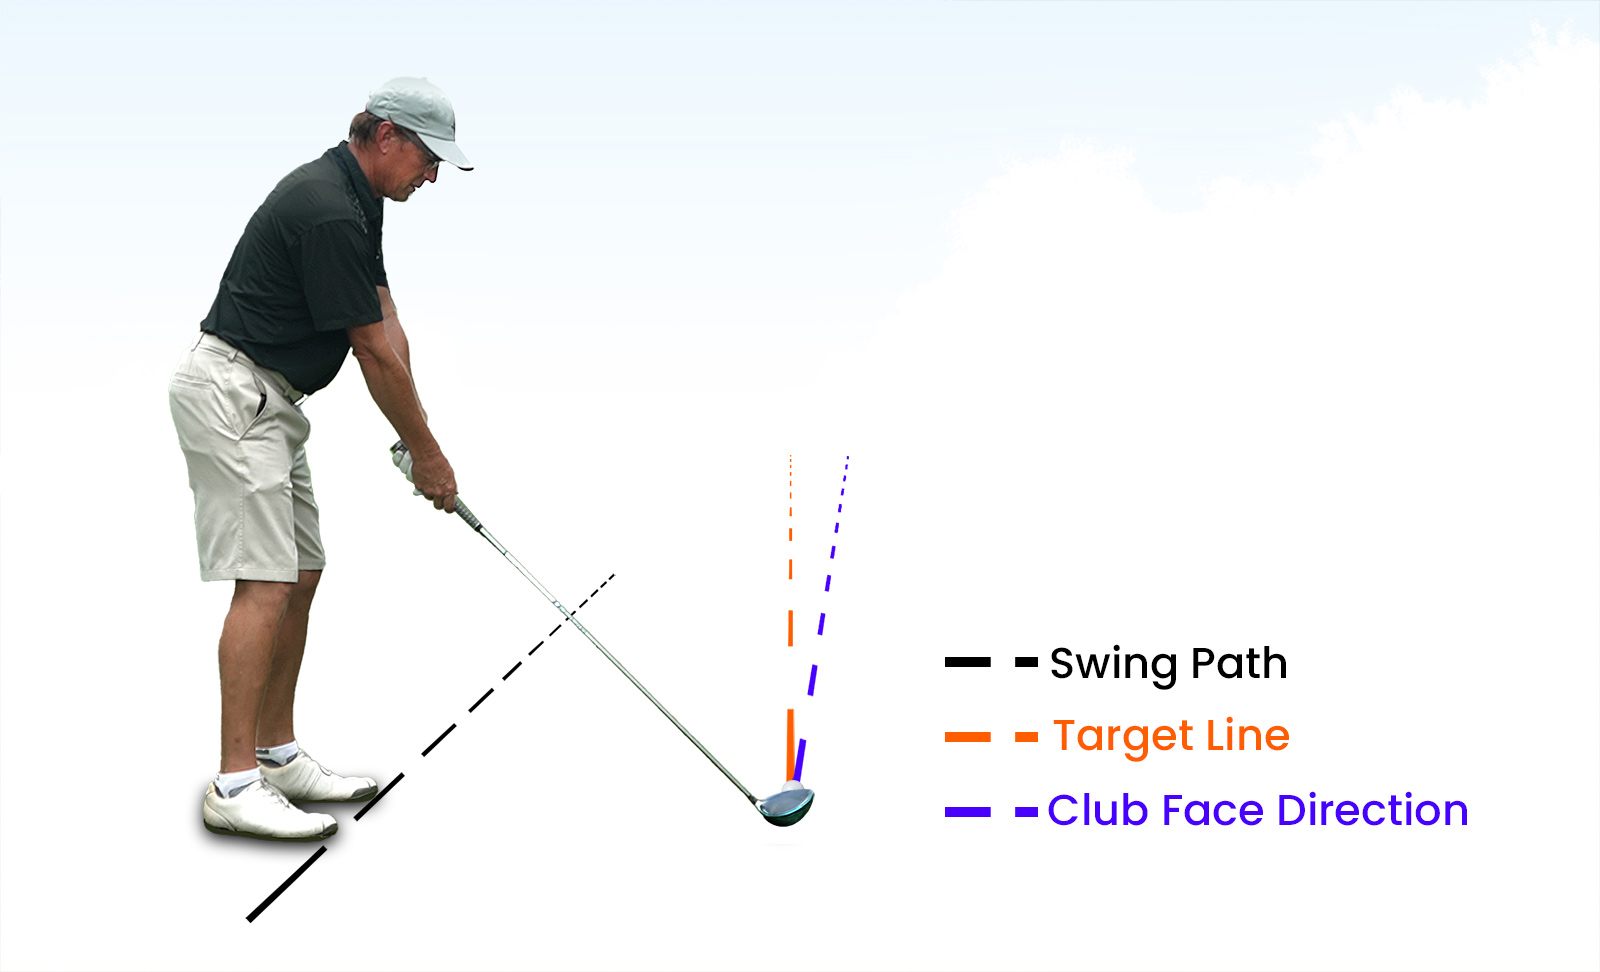 Golfer aligned to play a draw – closed stance, clubface, target line.